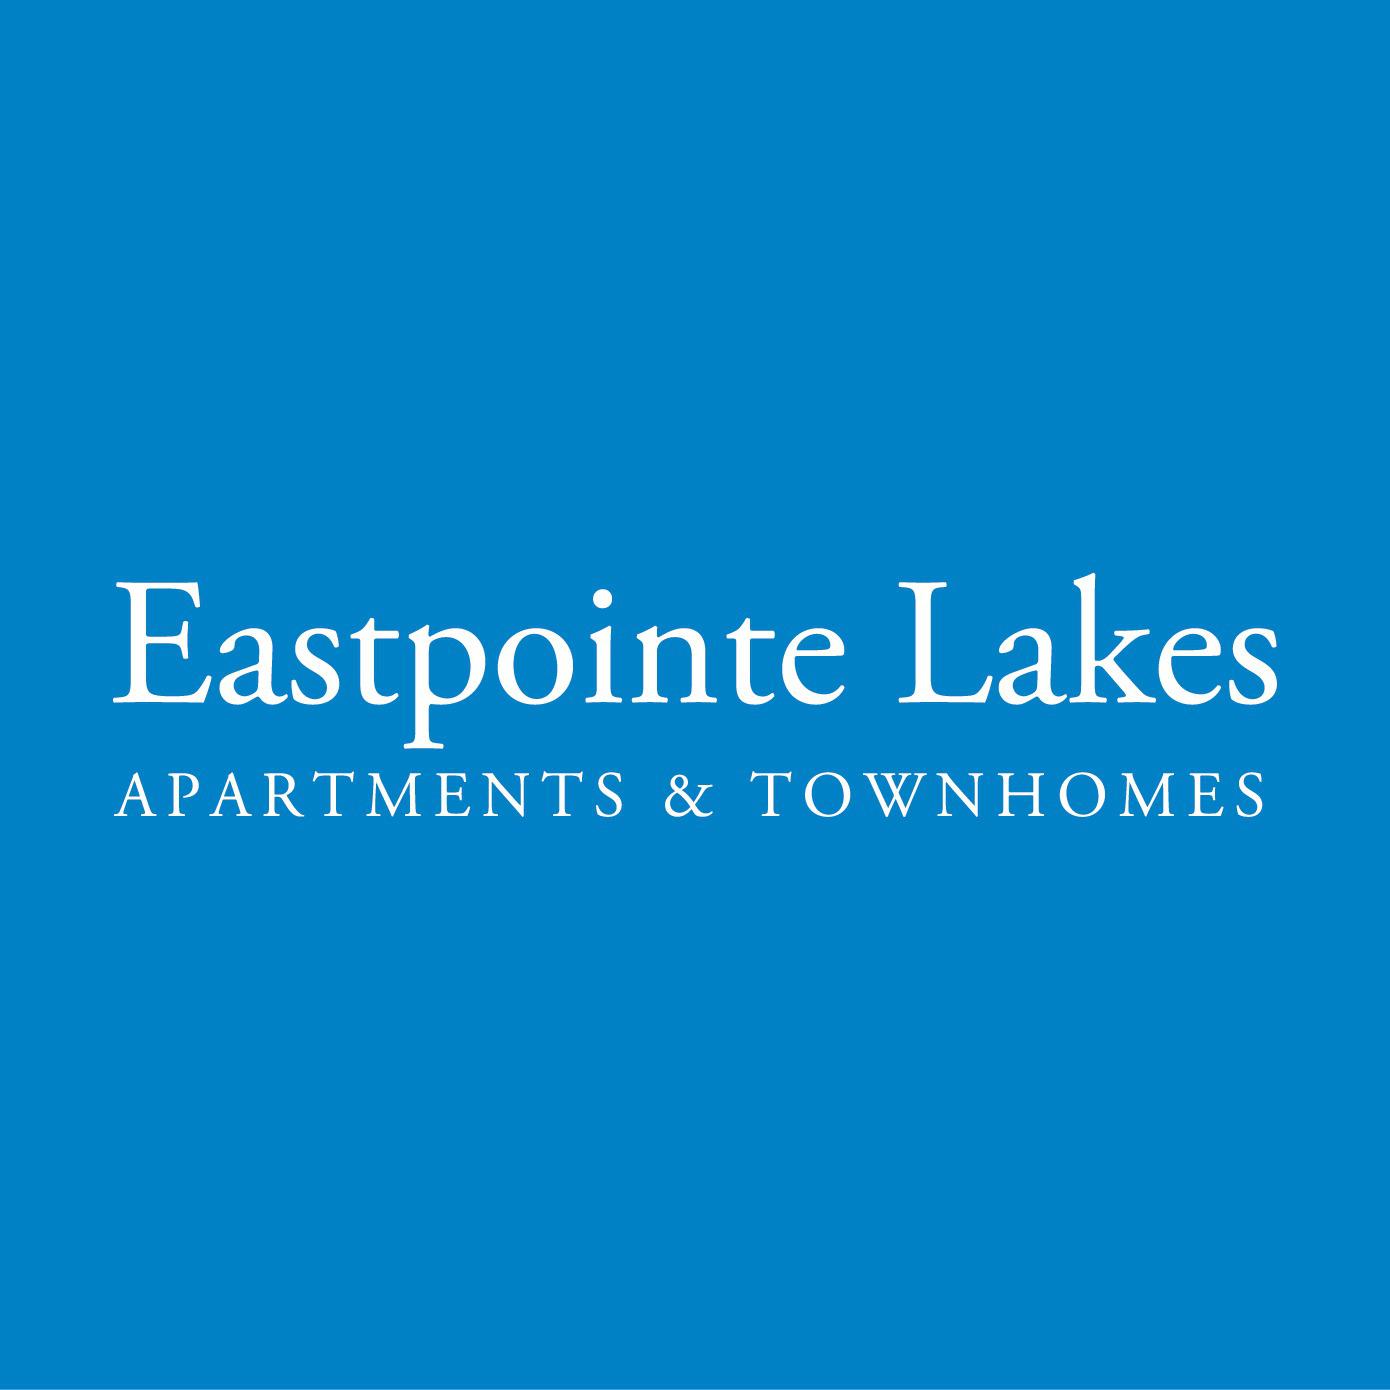 Eastpointe Lakes Apartments and Townhomes - Blacklick, OH 43004 - (614)866-8280 | ShowMeLocal.com